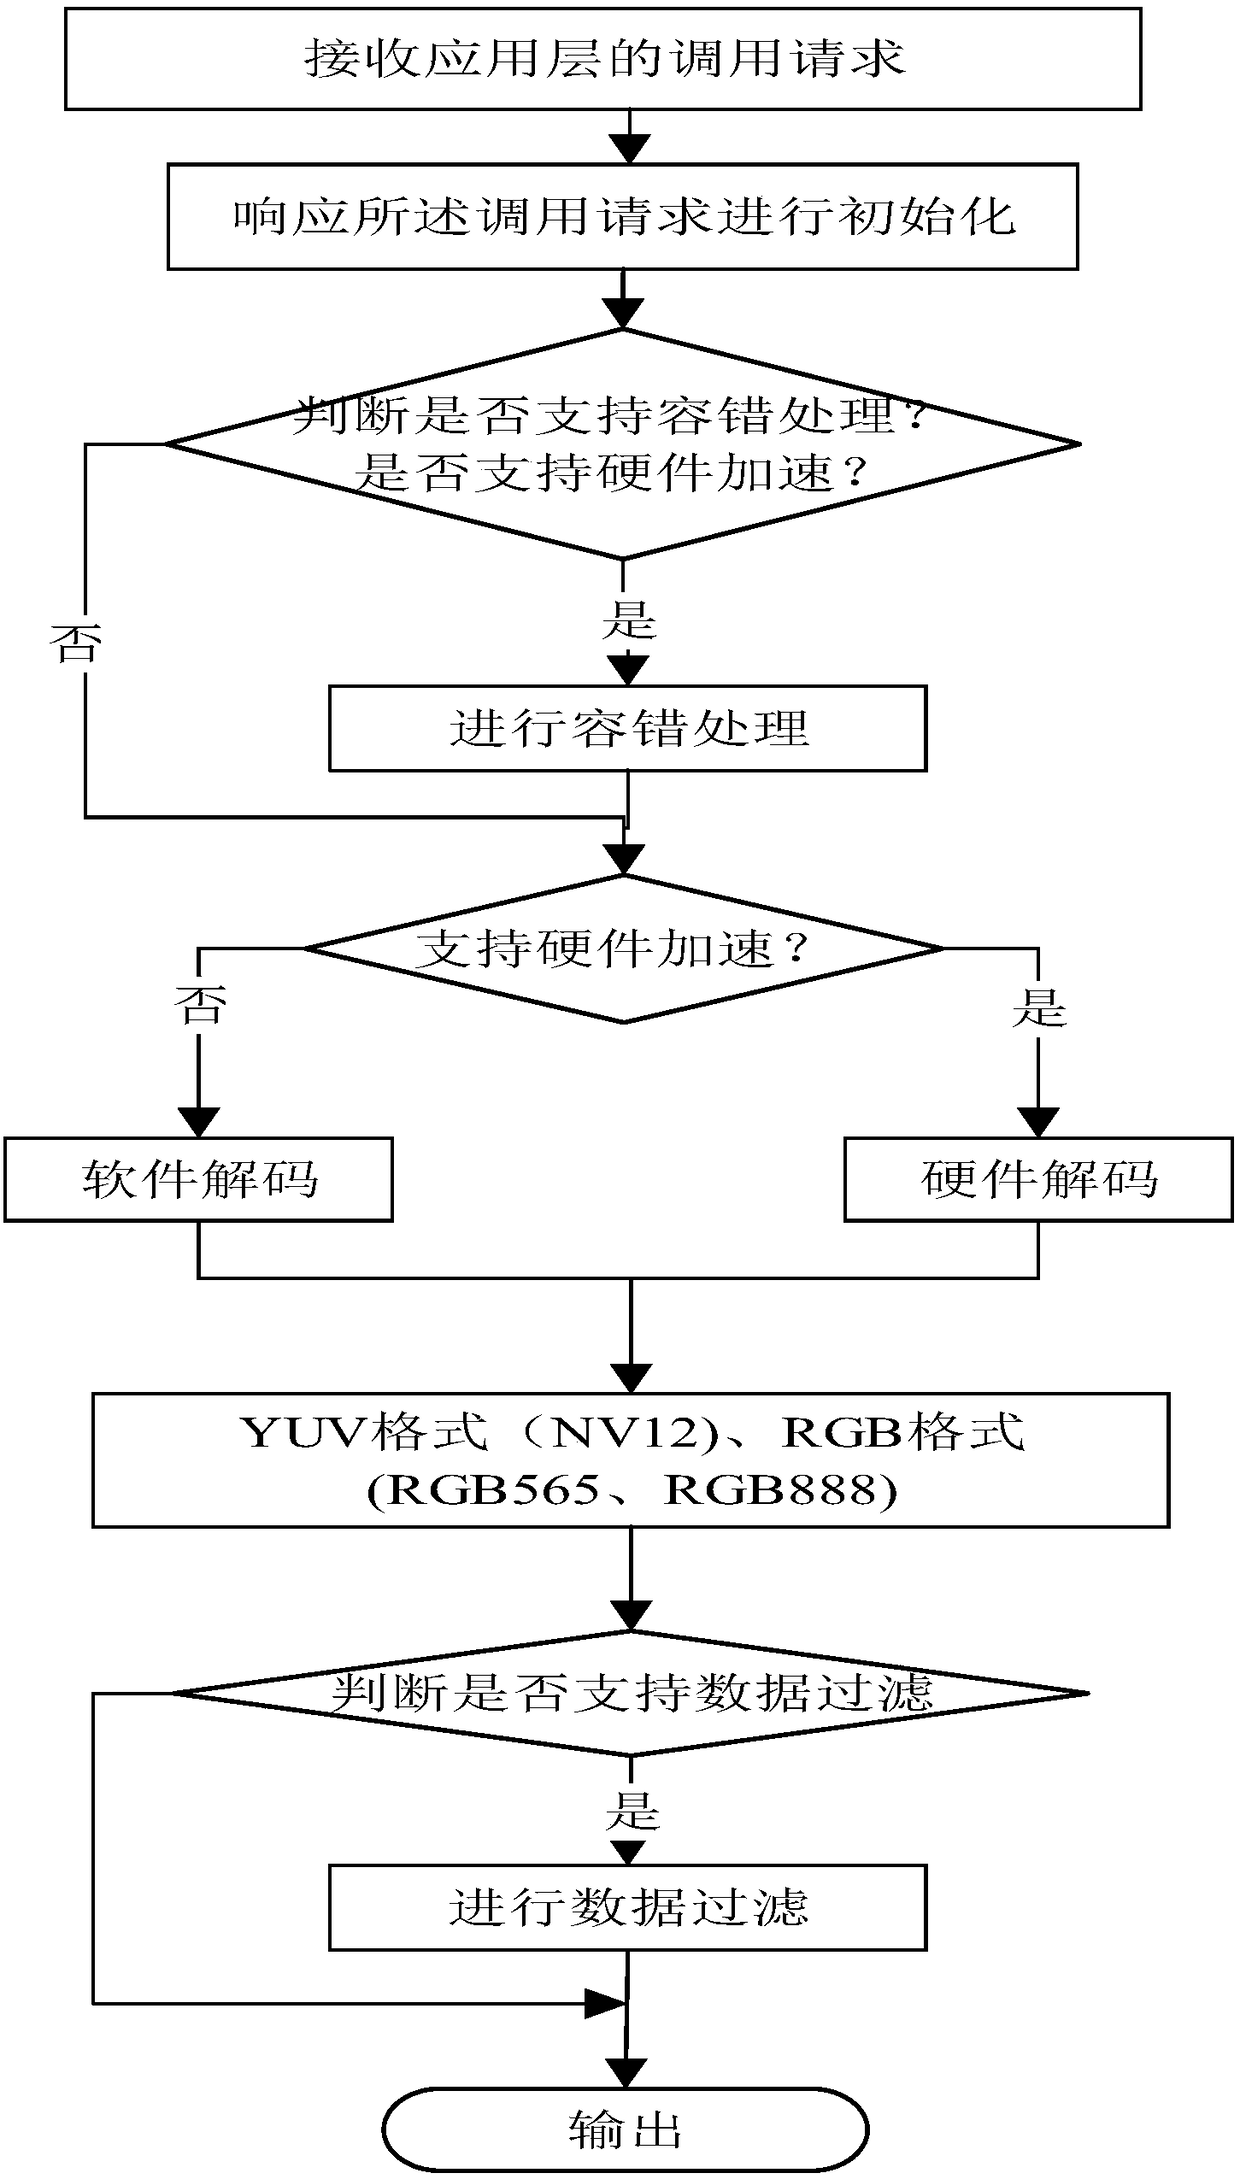 Camera middle layer image processing method and system on chip